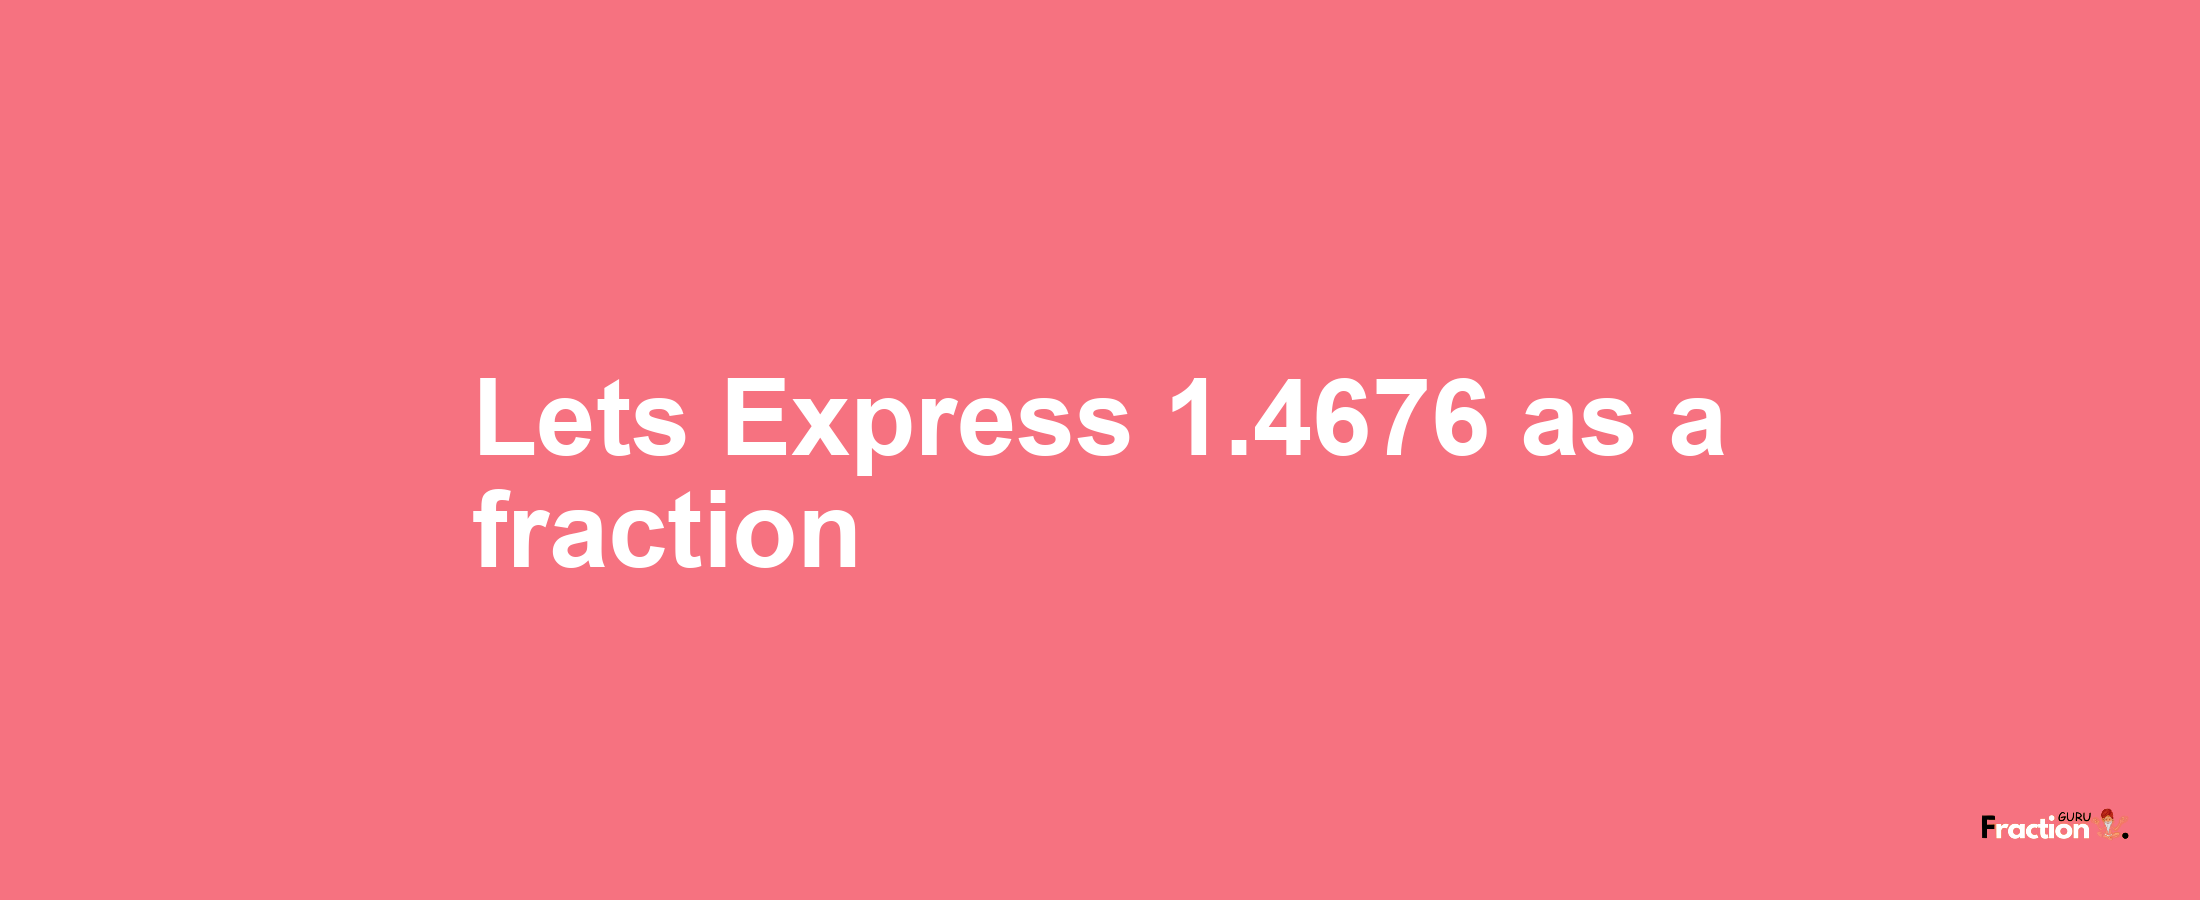 Lets Express 1.4676 as afraction